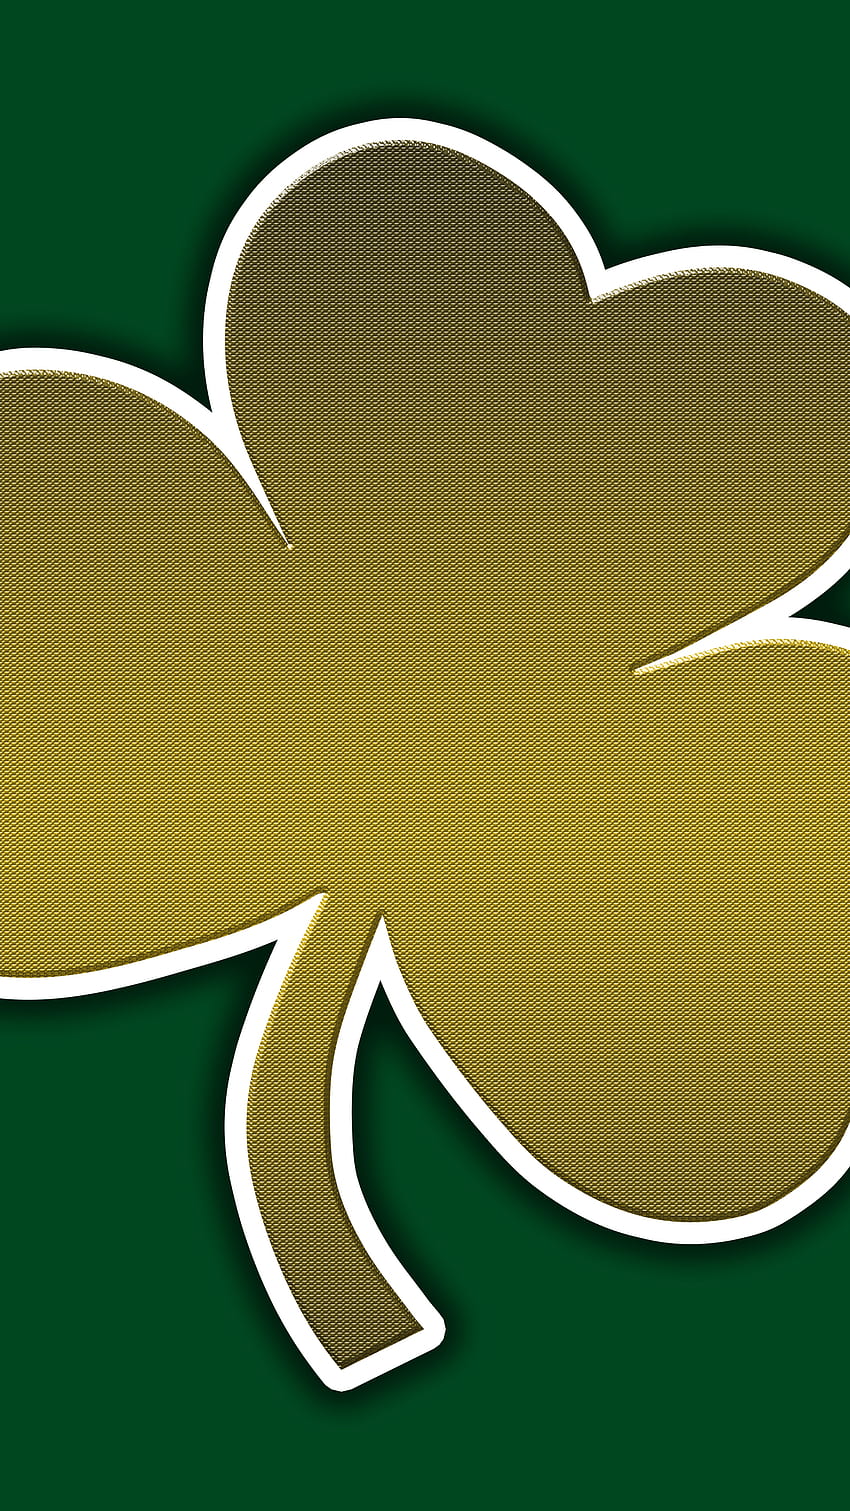 Notre Dame IPhone Android For Your Smart Phone. Save, Football 1440x2560 HD phone wallpaper